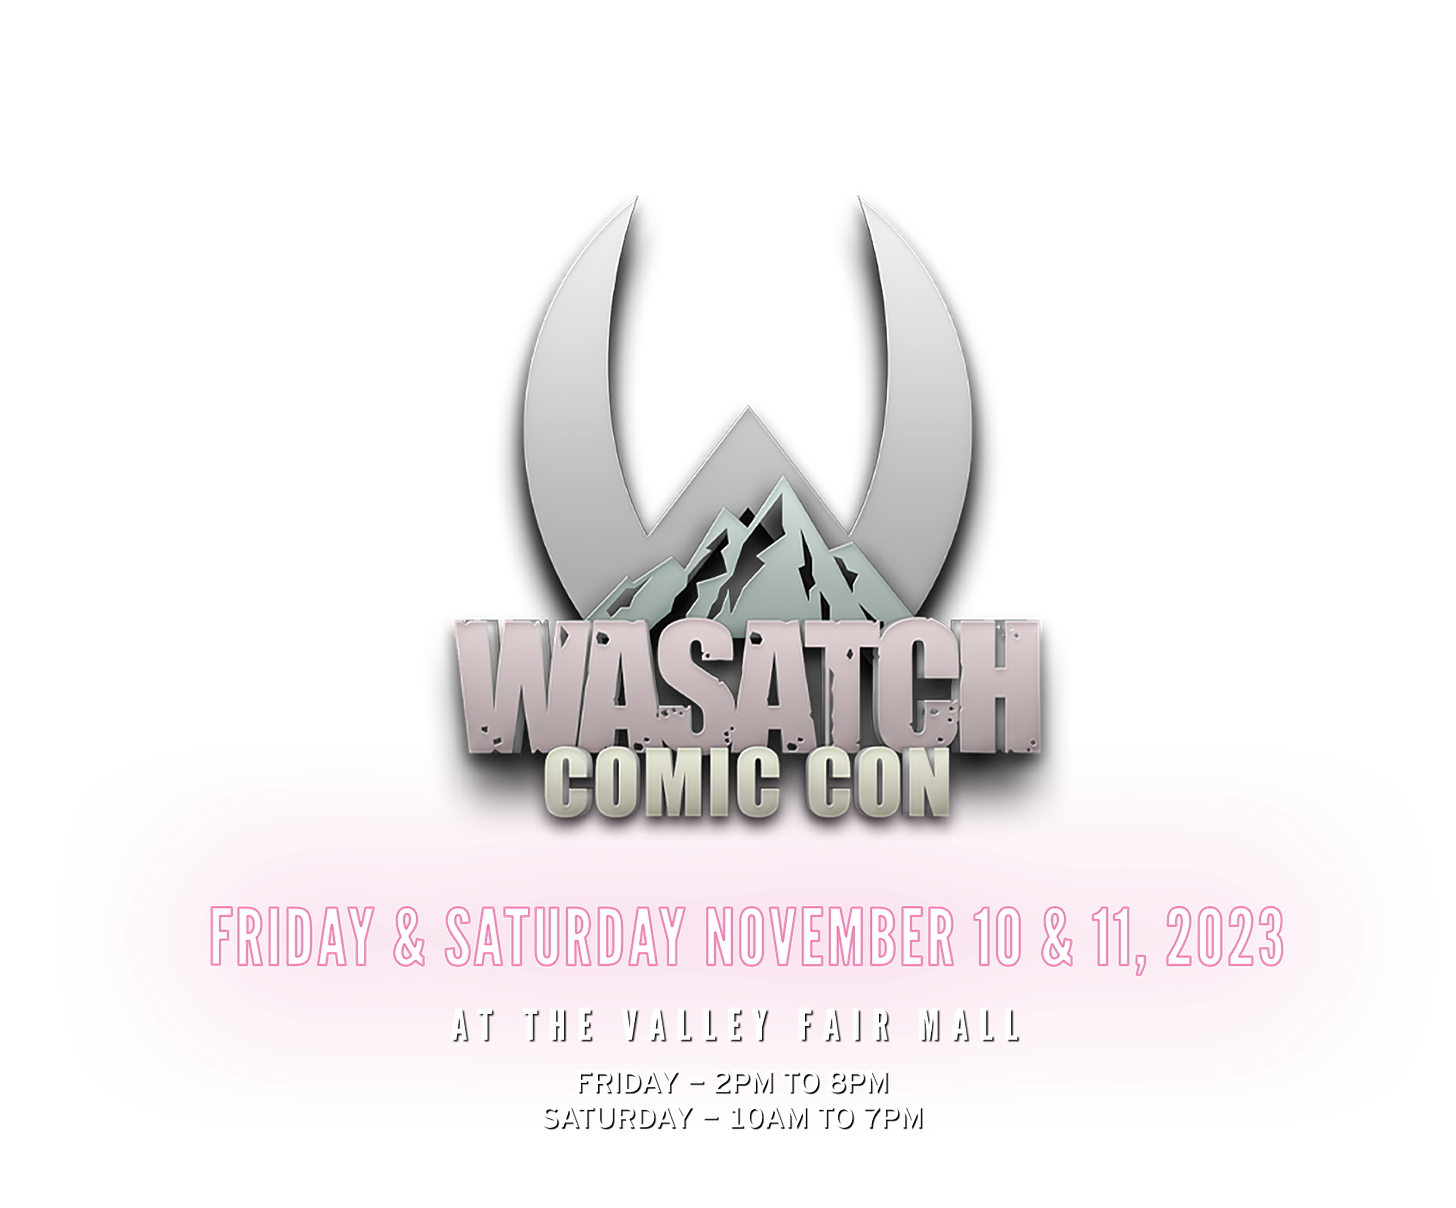 Wasatch Comic Con. Friday and Saturday, November 10 and 11, 2023 at the Valley Fair Mall. Friday 2 pm to 8 pm. Saturday 10 am to 7 pm. 